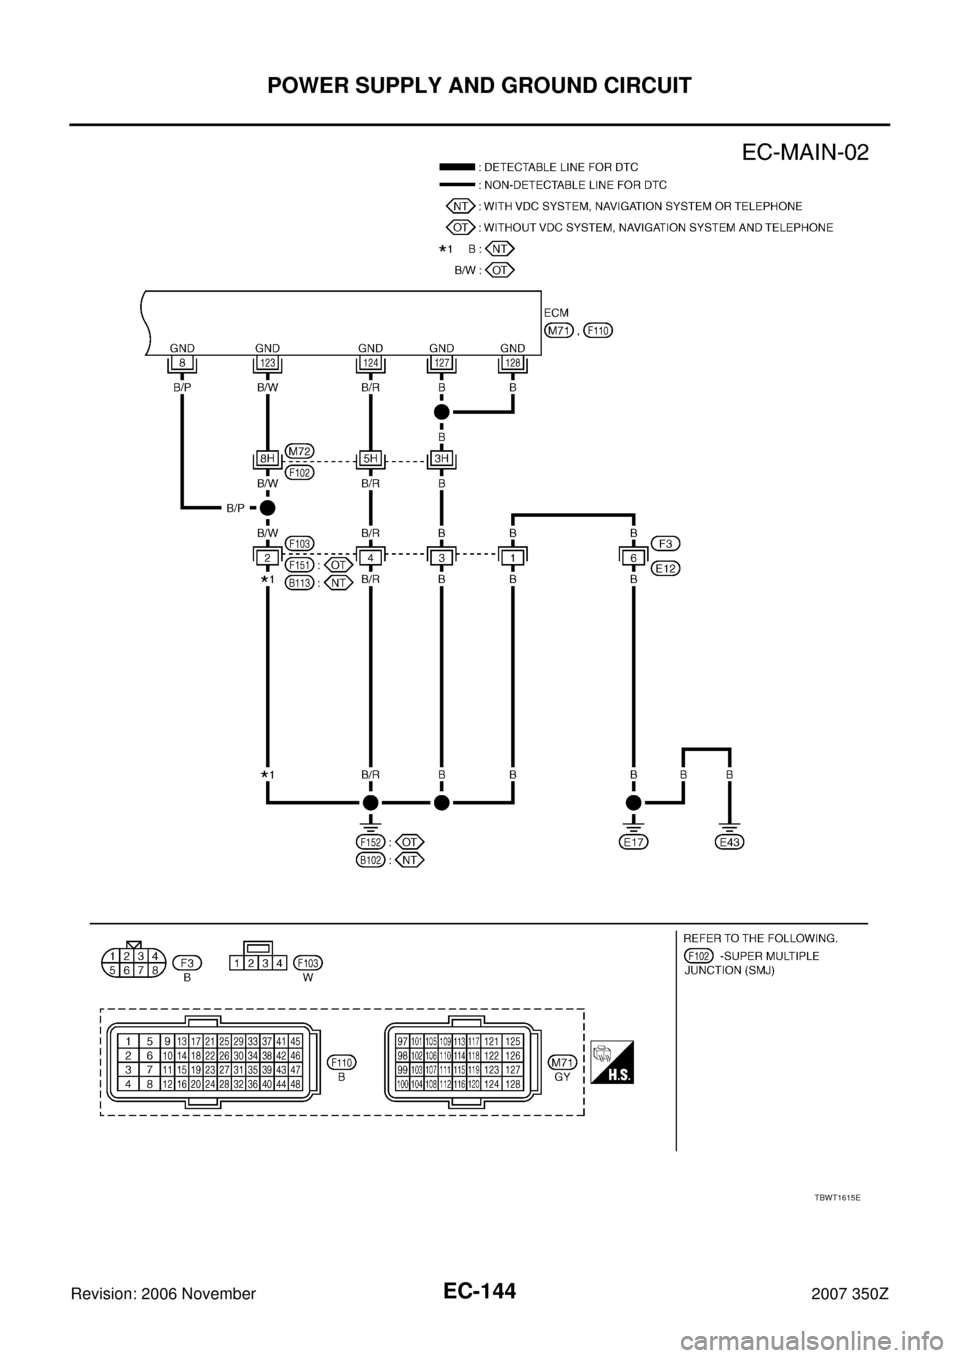 NISSAN 350Z 2007 Z33 Engine Control Workshop Manual EC-144
POWER SUPPLY AND GROUND CIRCUIT
Revision: 2006 November2007 350Z
TBWT1615E 